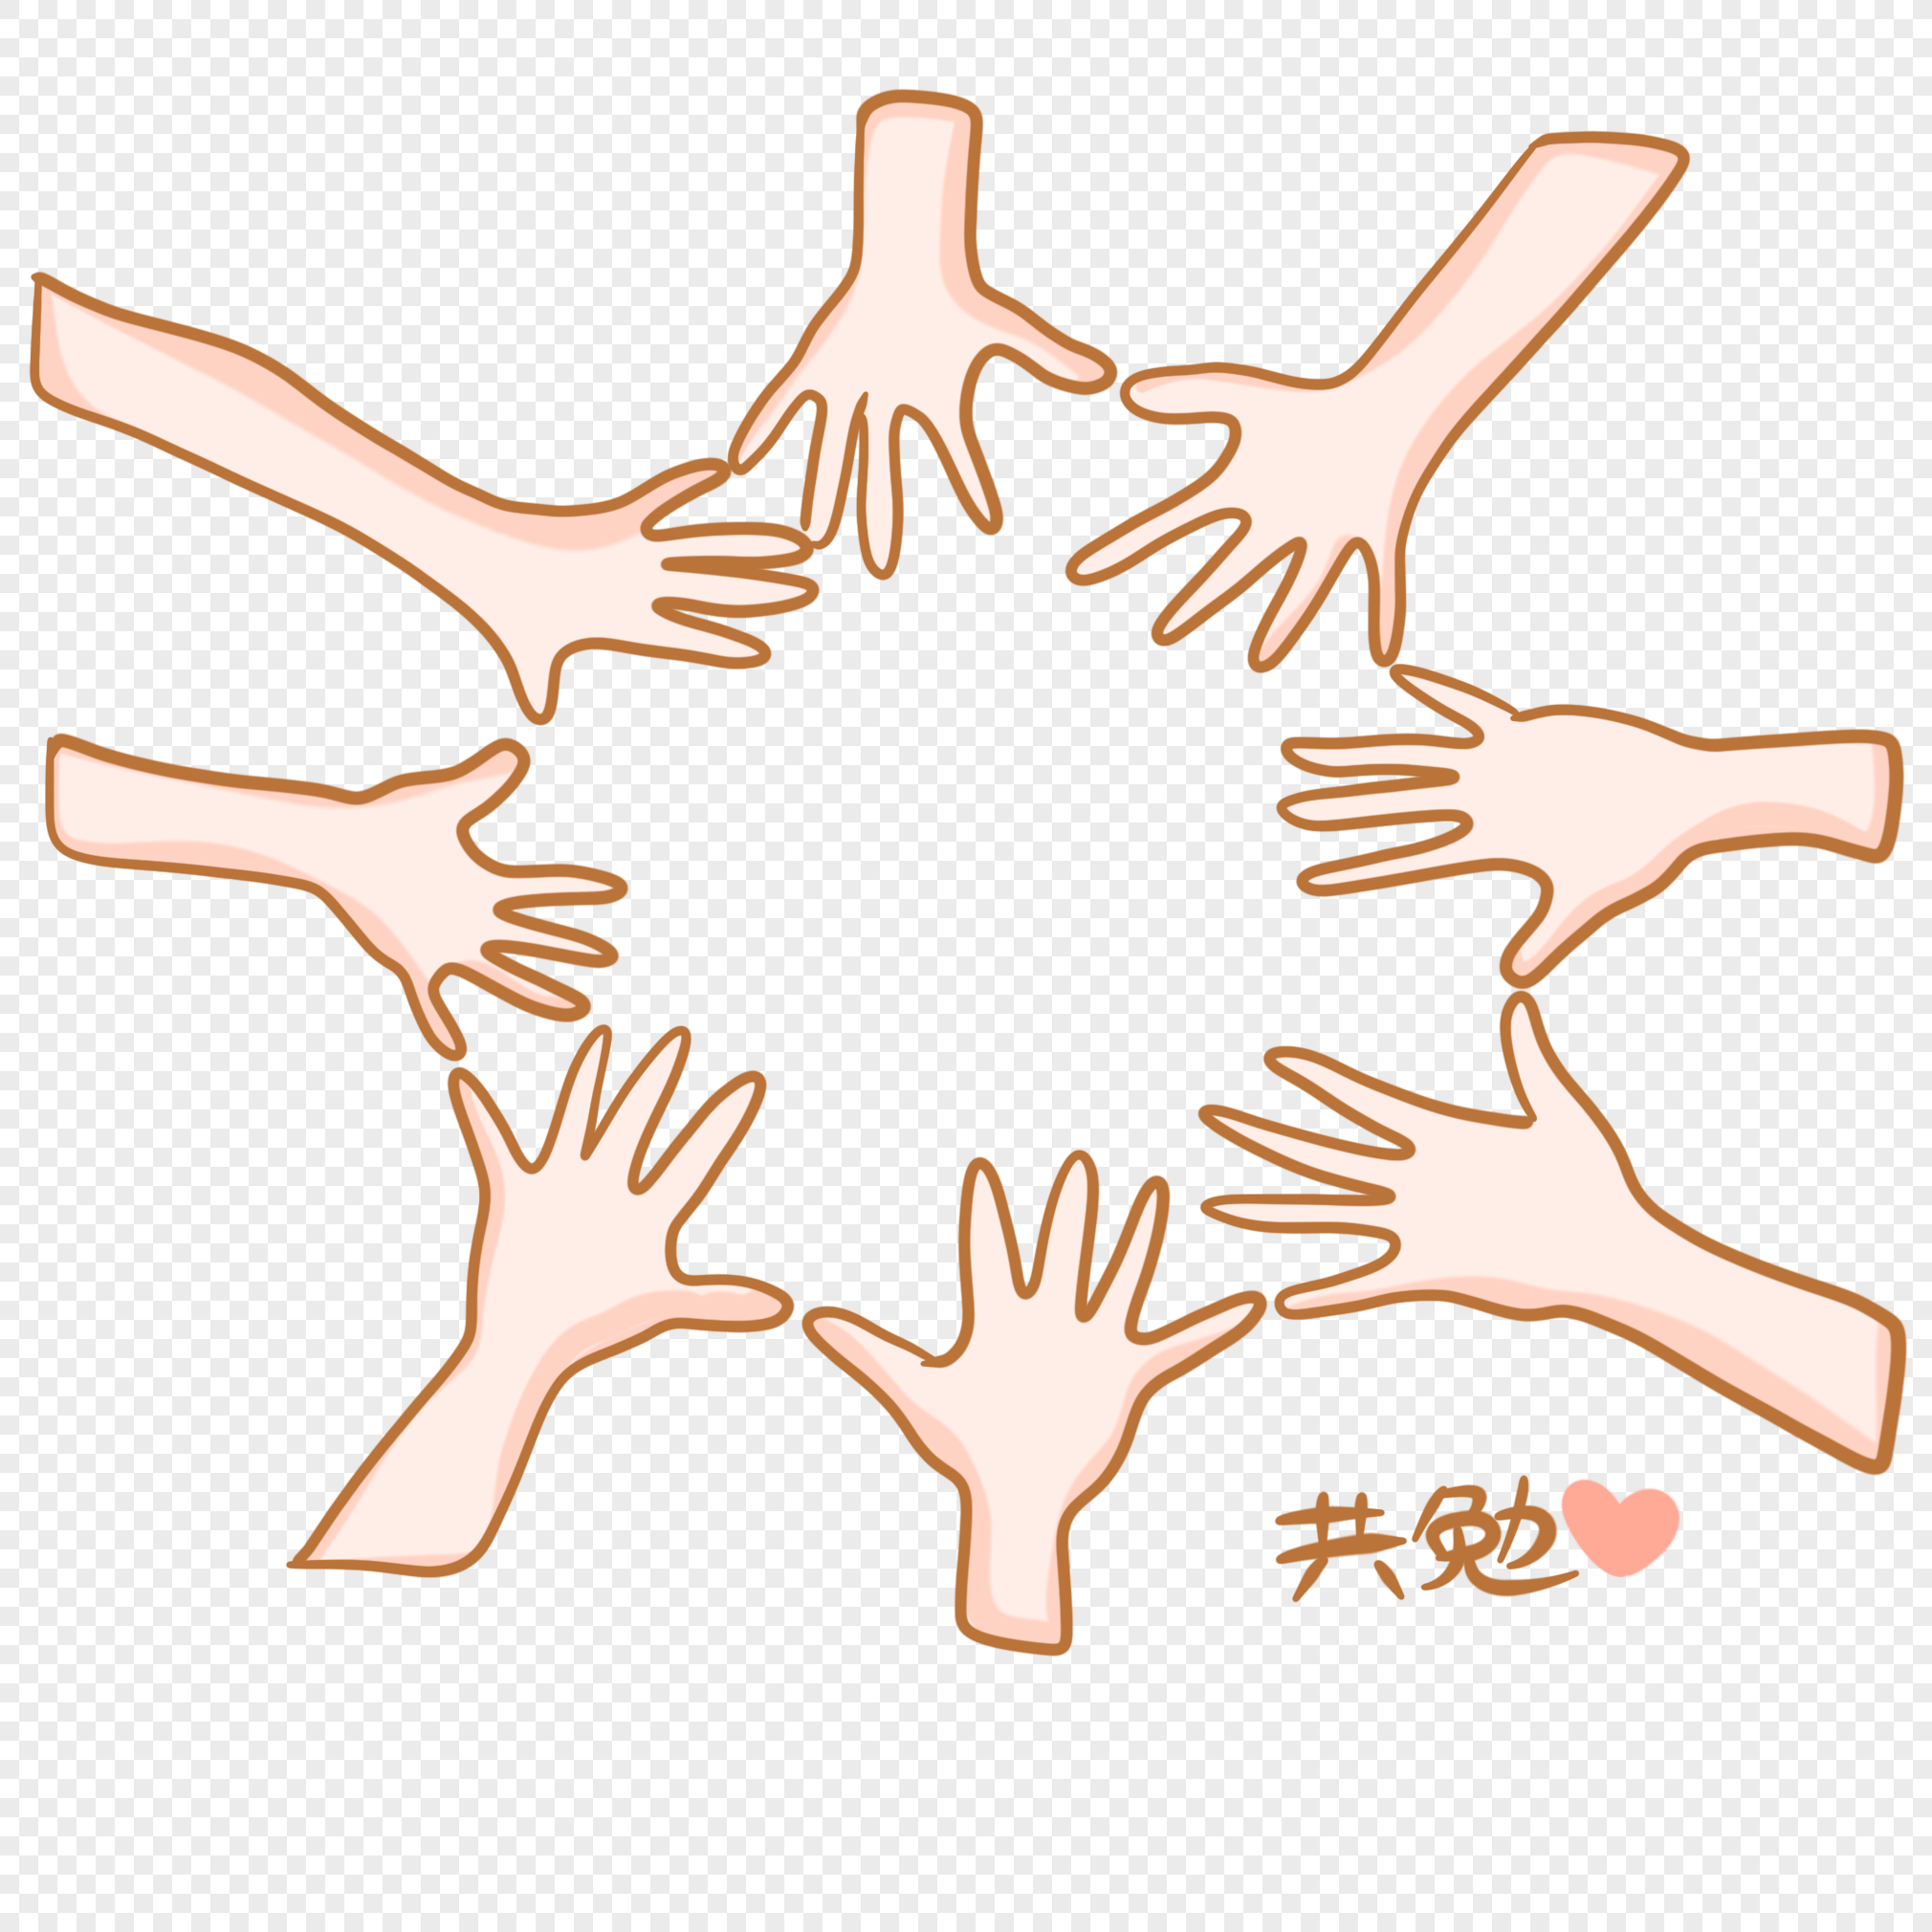 Holding Hand Unity Social Campaign Vector Symbol Graphic Logo Design  Template Royalty Free SVG, Cliparts, Vectors, and Stock Illustration. Image  125501797.